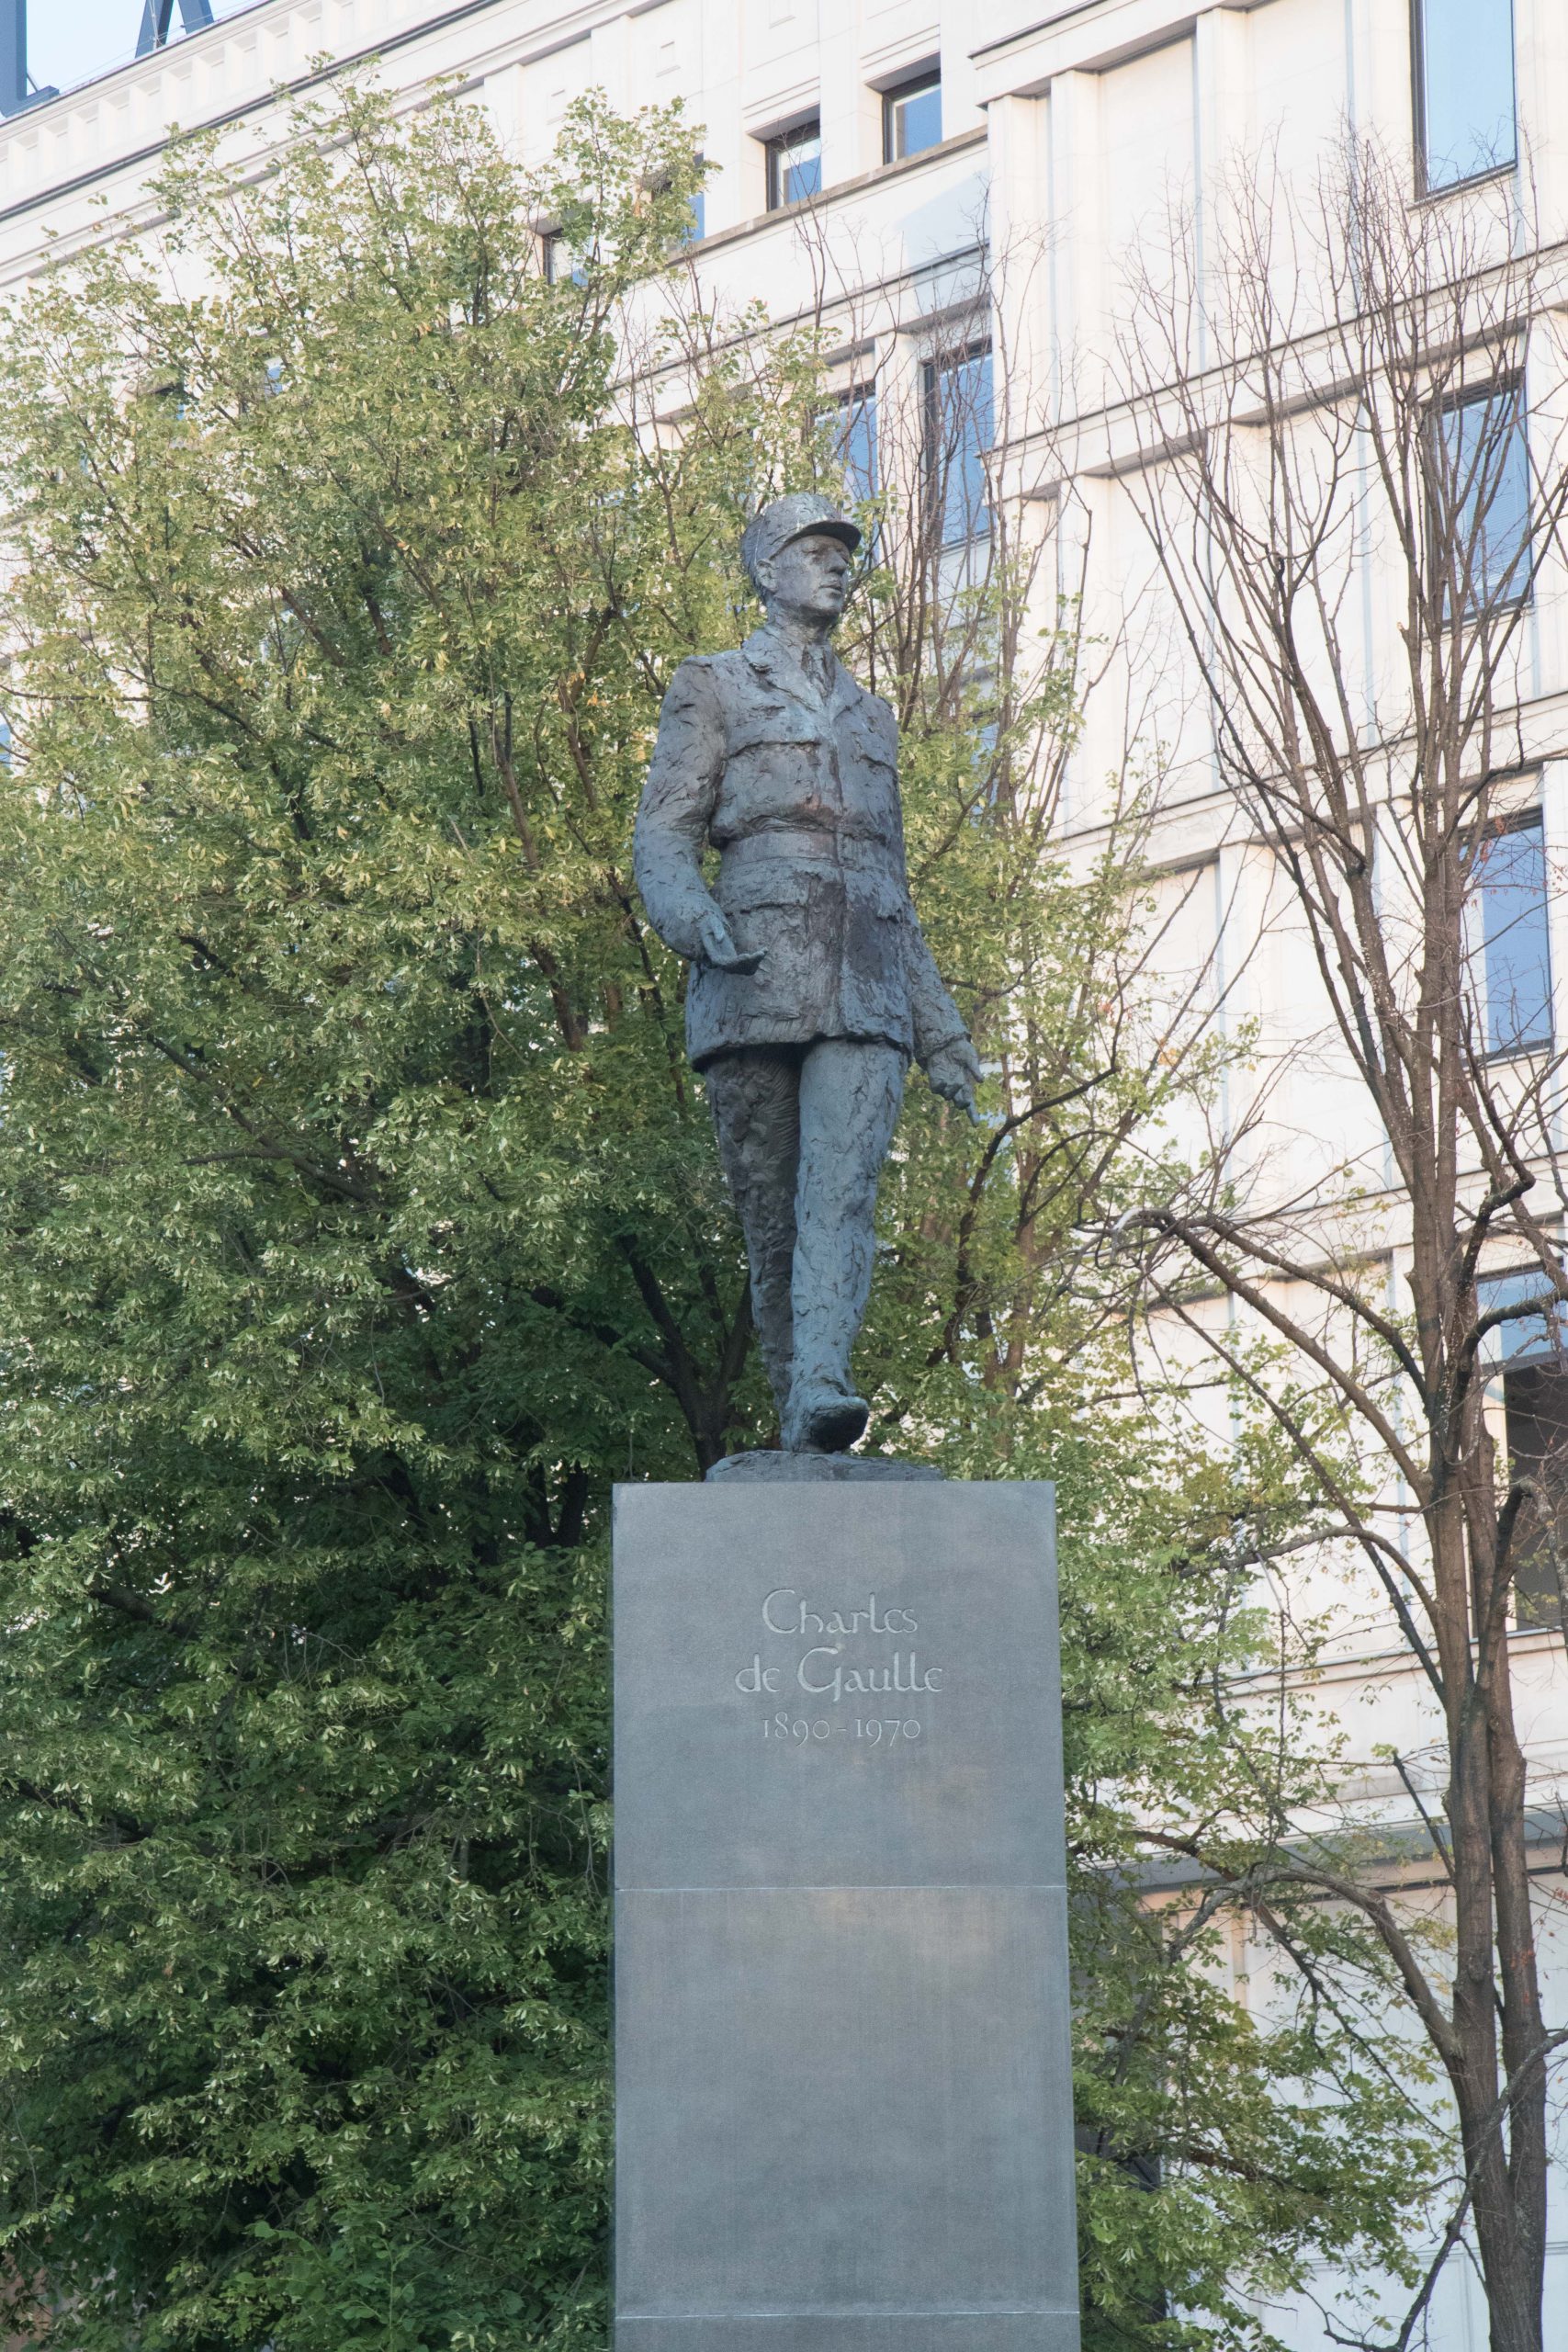 Statue of Charles de Gaulle. Interesting choice, I must say. 